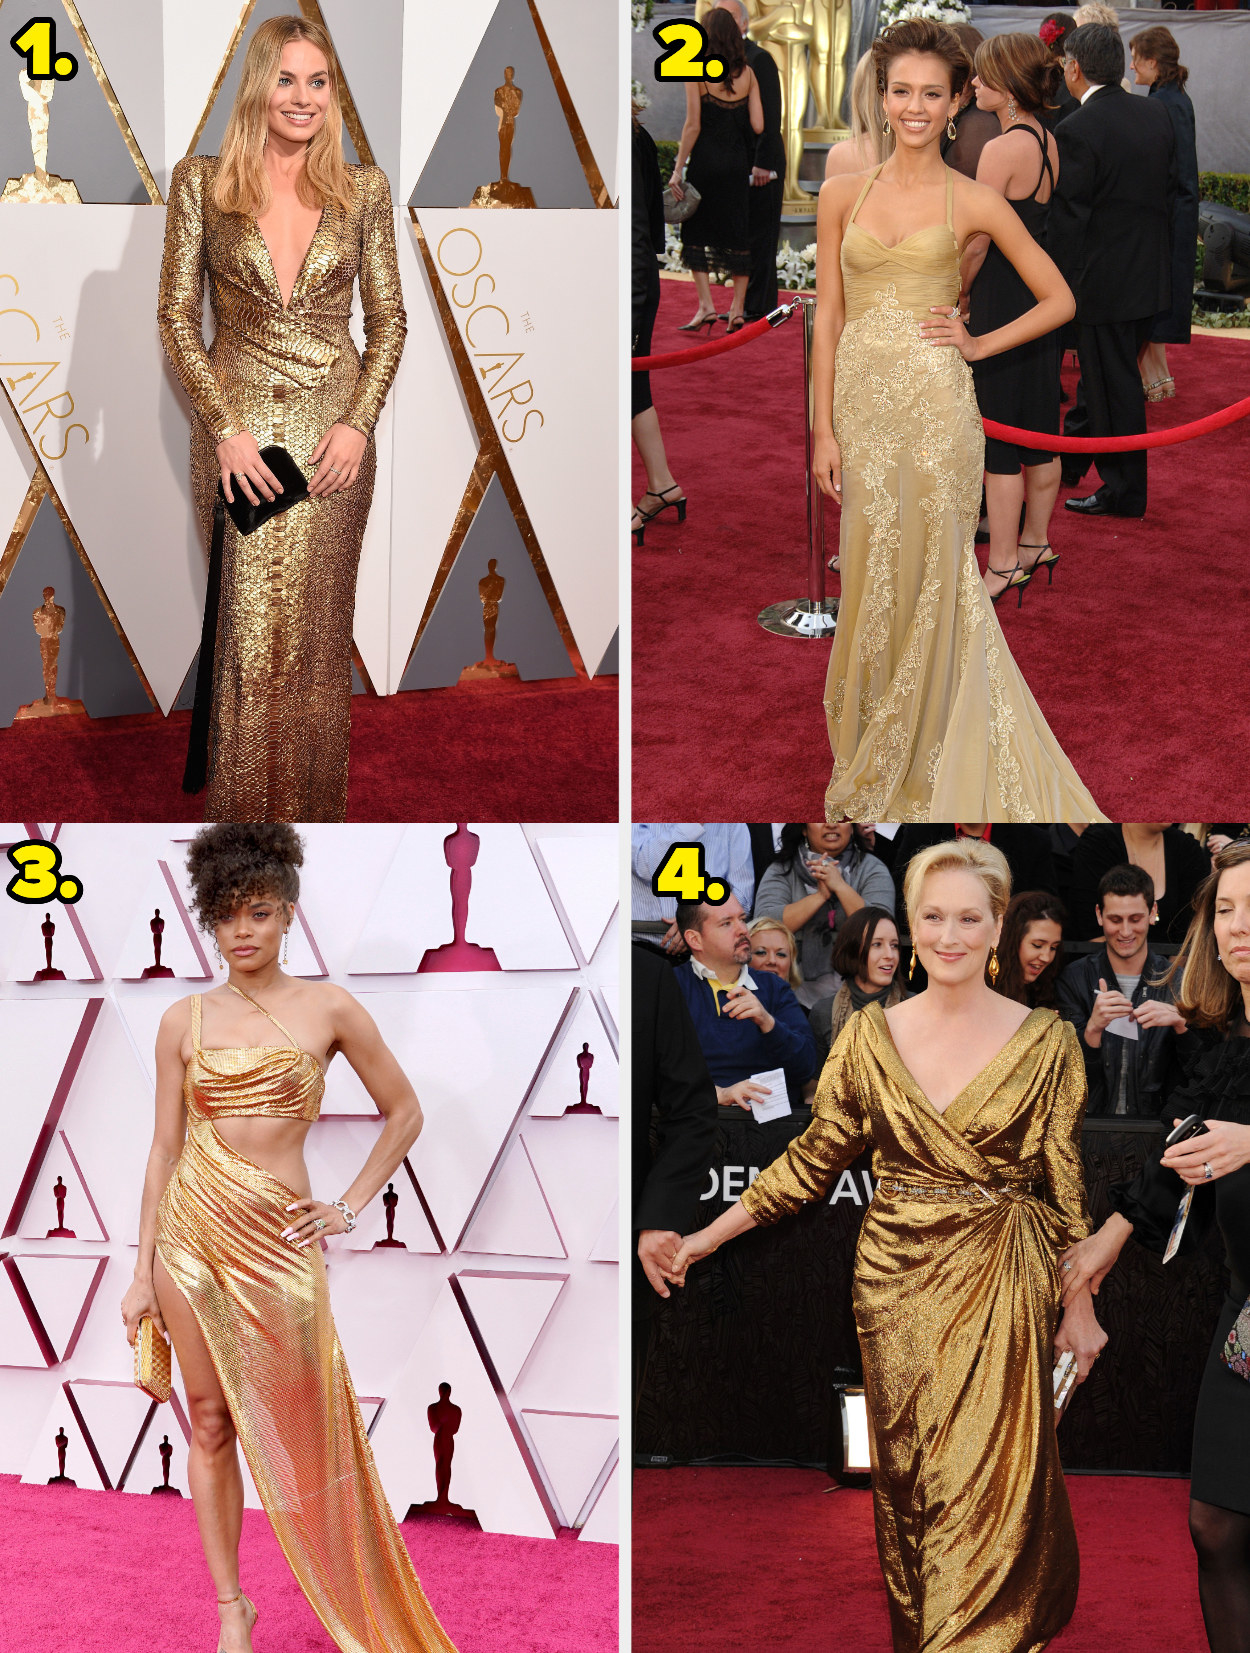 1 Margot Robbie has a longsleeve glittering gown 2 Jessica Alba has a halter gown with flowery lace embroidered 3 Andra Day has an asymmetrical gown with a triangle cutout on her ribs and a deep slit 4 Meryl Streep has a v-neck long sleeved dress